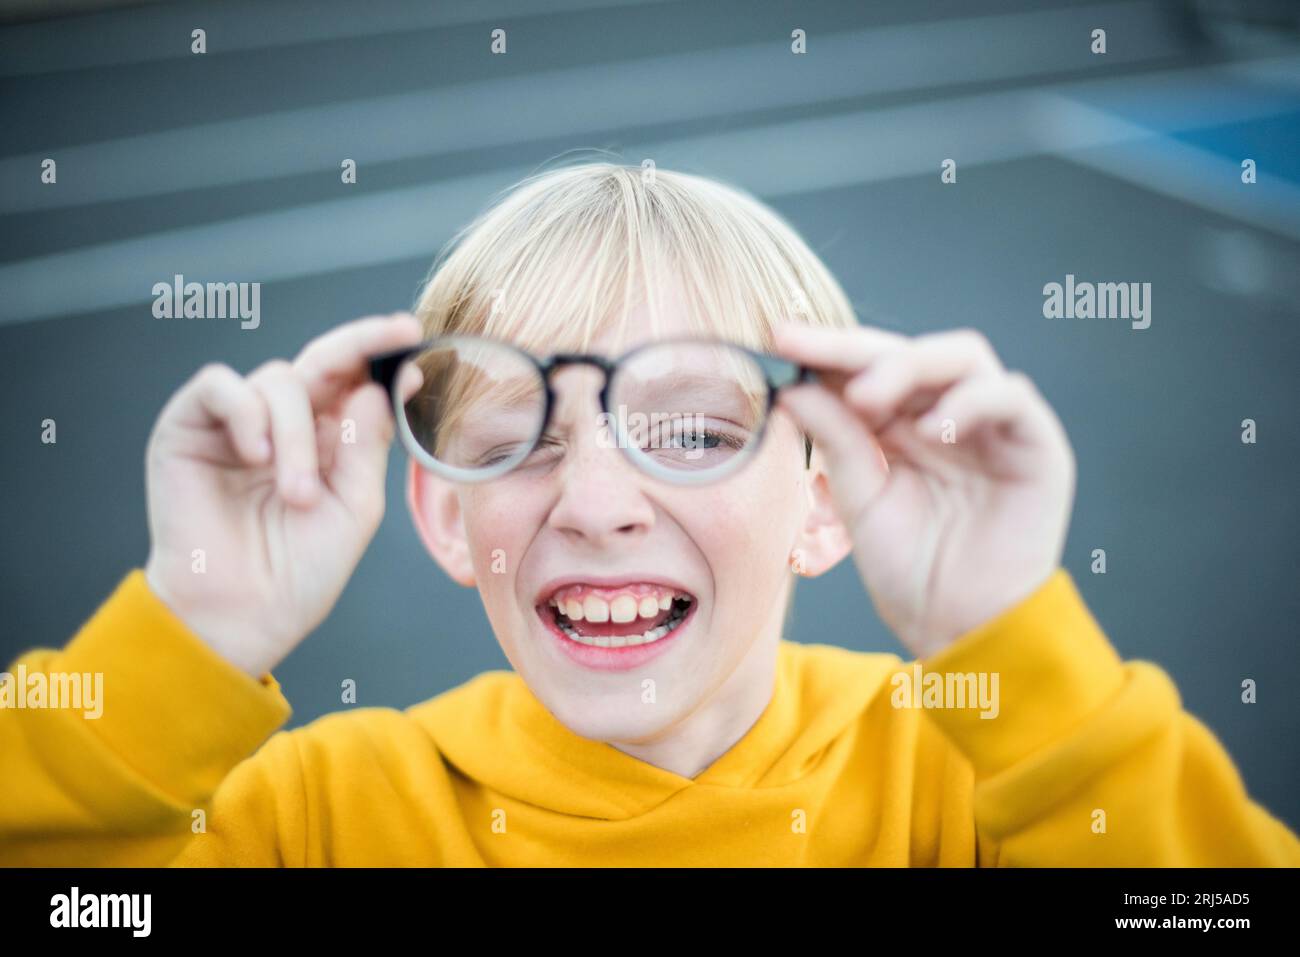 Young teenage boy playing with eyeglasses in front of his face Stock Photo